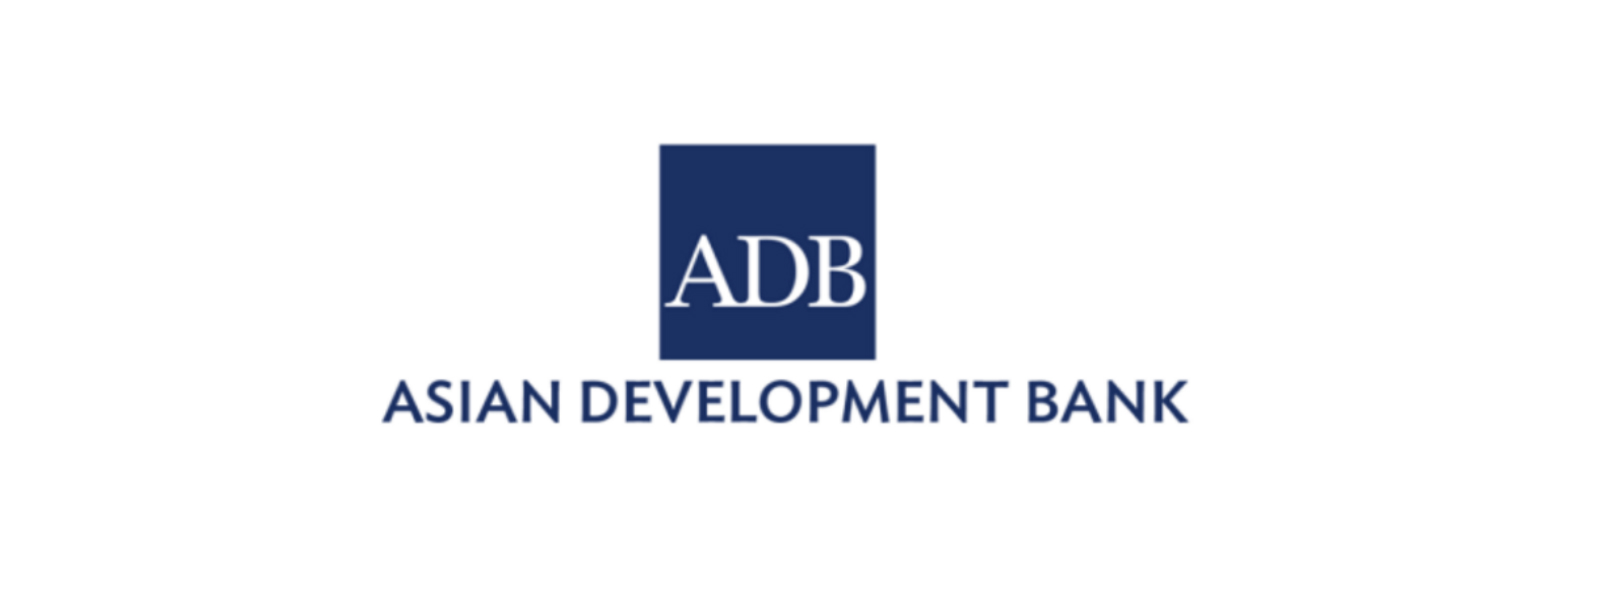 Sri Lanka cleared to get more money from ADB